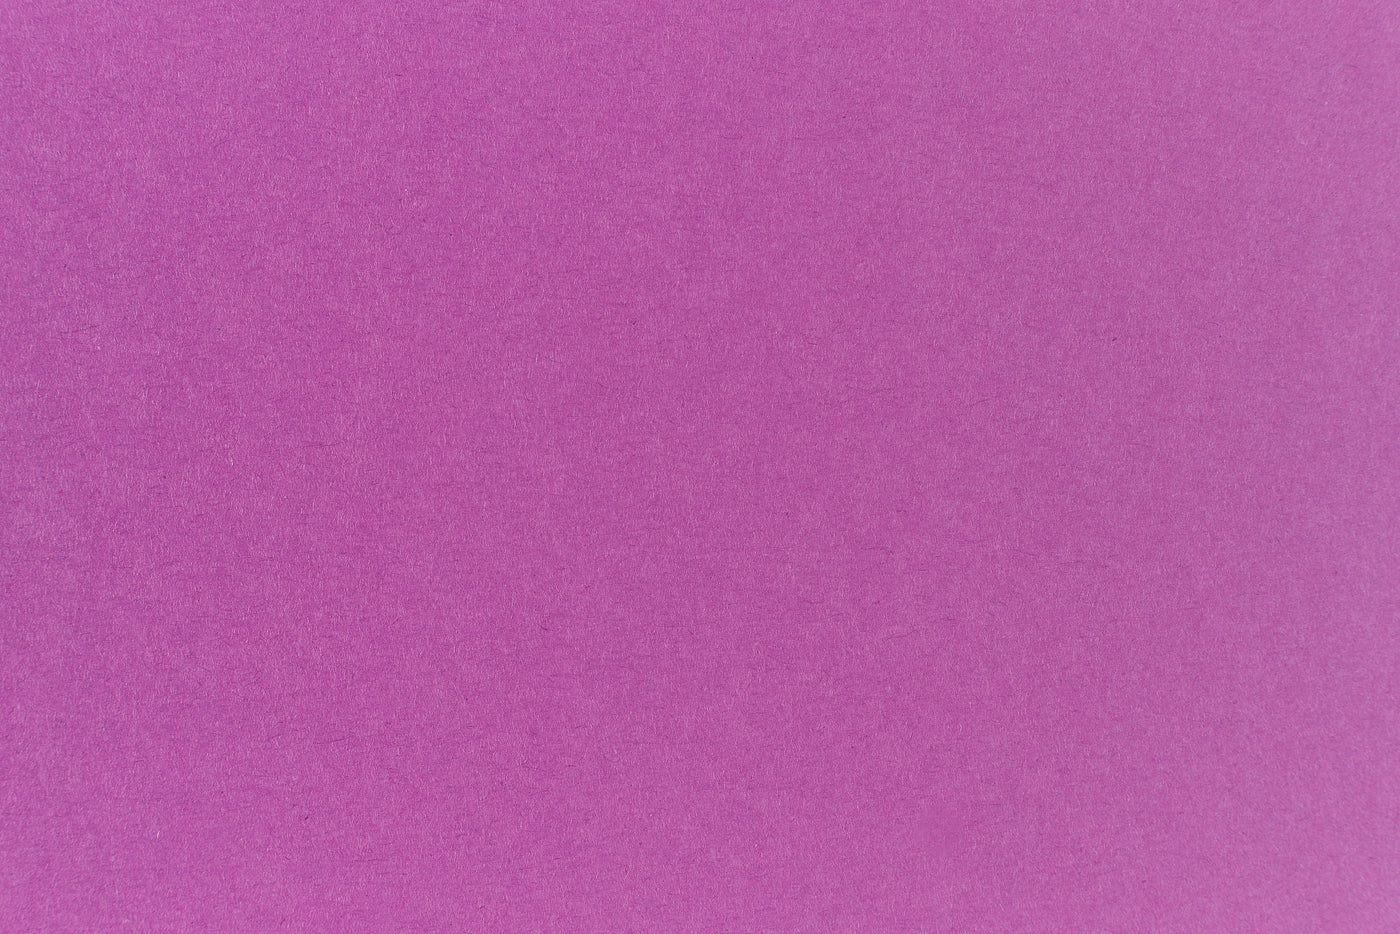 Plum Punch Cardstock (Vivitone, Cover Weight)